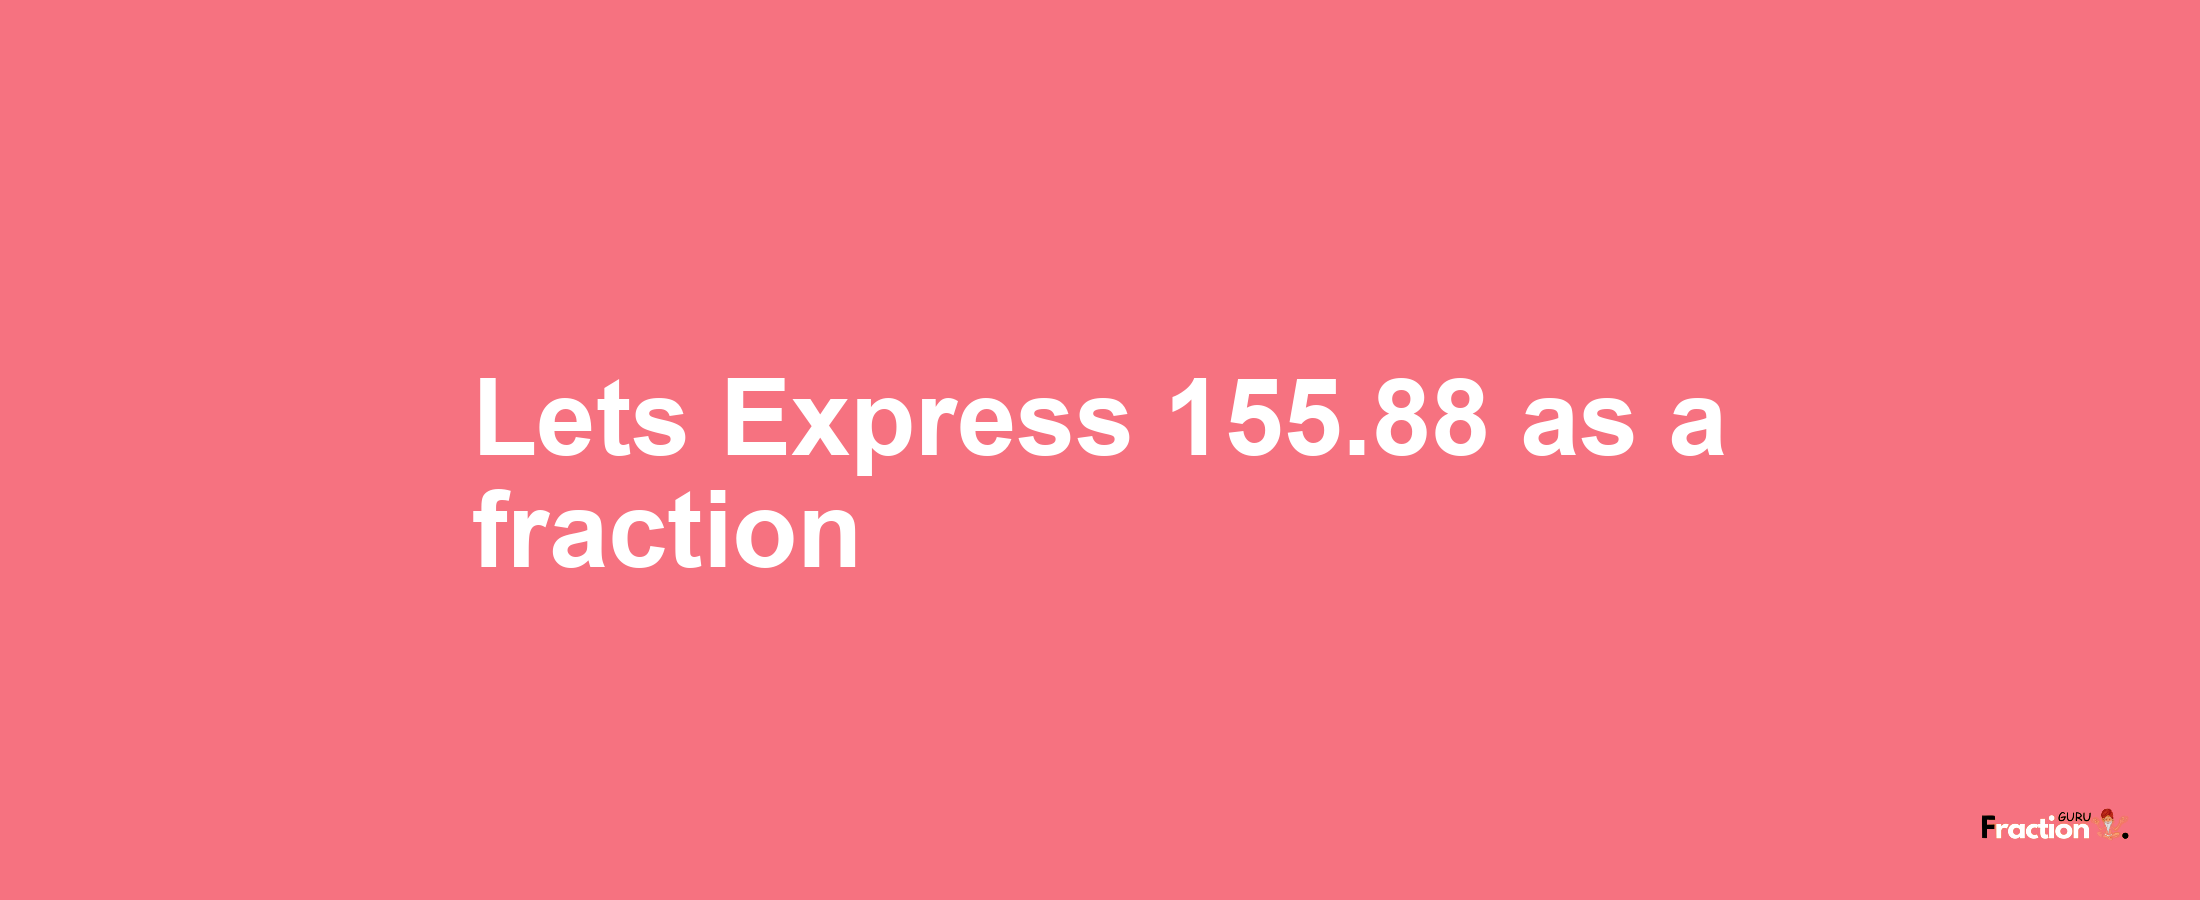 Lets Express 155.88 as afraction